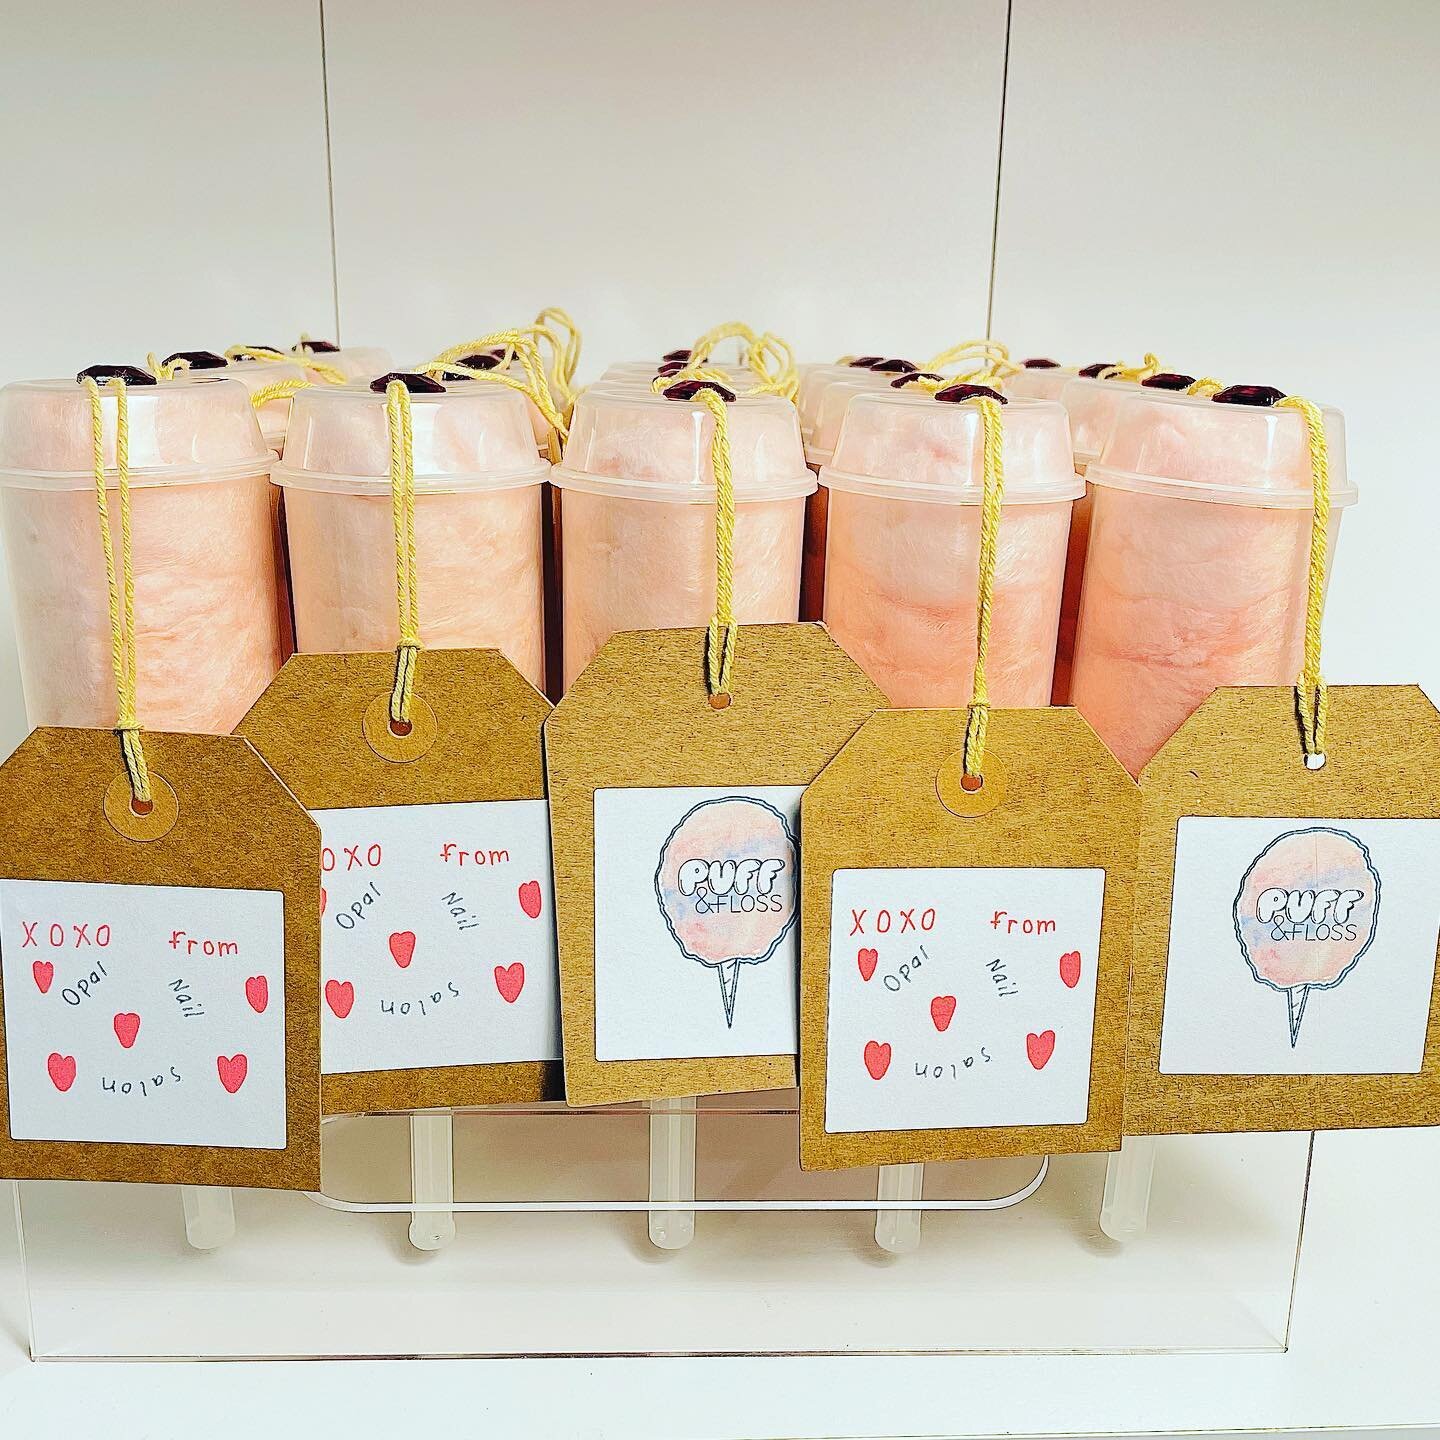 We&rsquo;d like to give a shout out to Opal Nail Studio for the sweet puff pop Valentine order. We LOVED finding these cute heart shaped puff pop containers, and the heart rhinestones really brought the flair! @opalstudioseattle is an AMAZING nail st